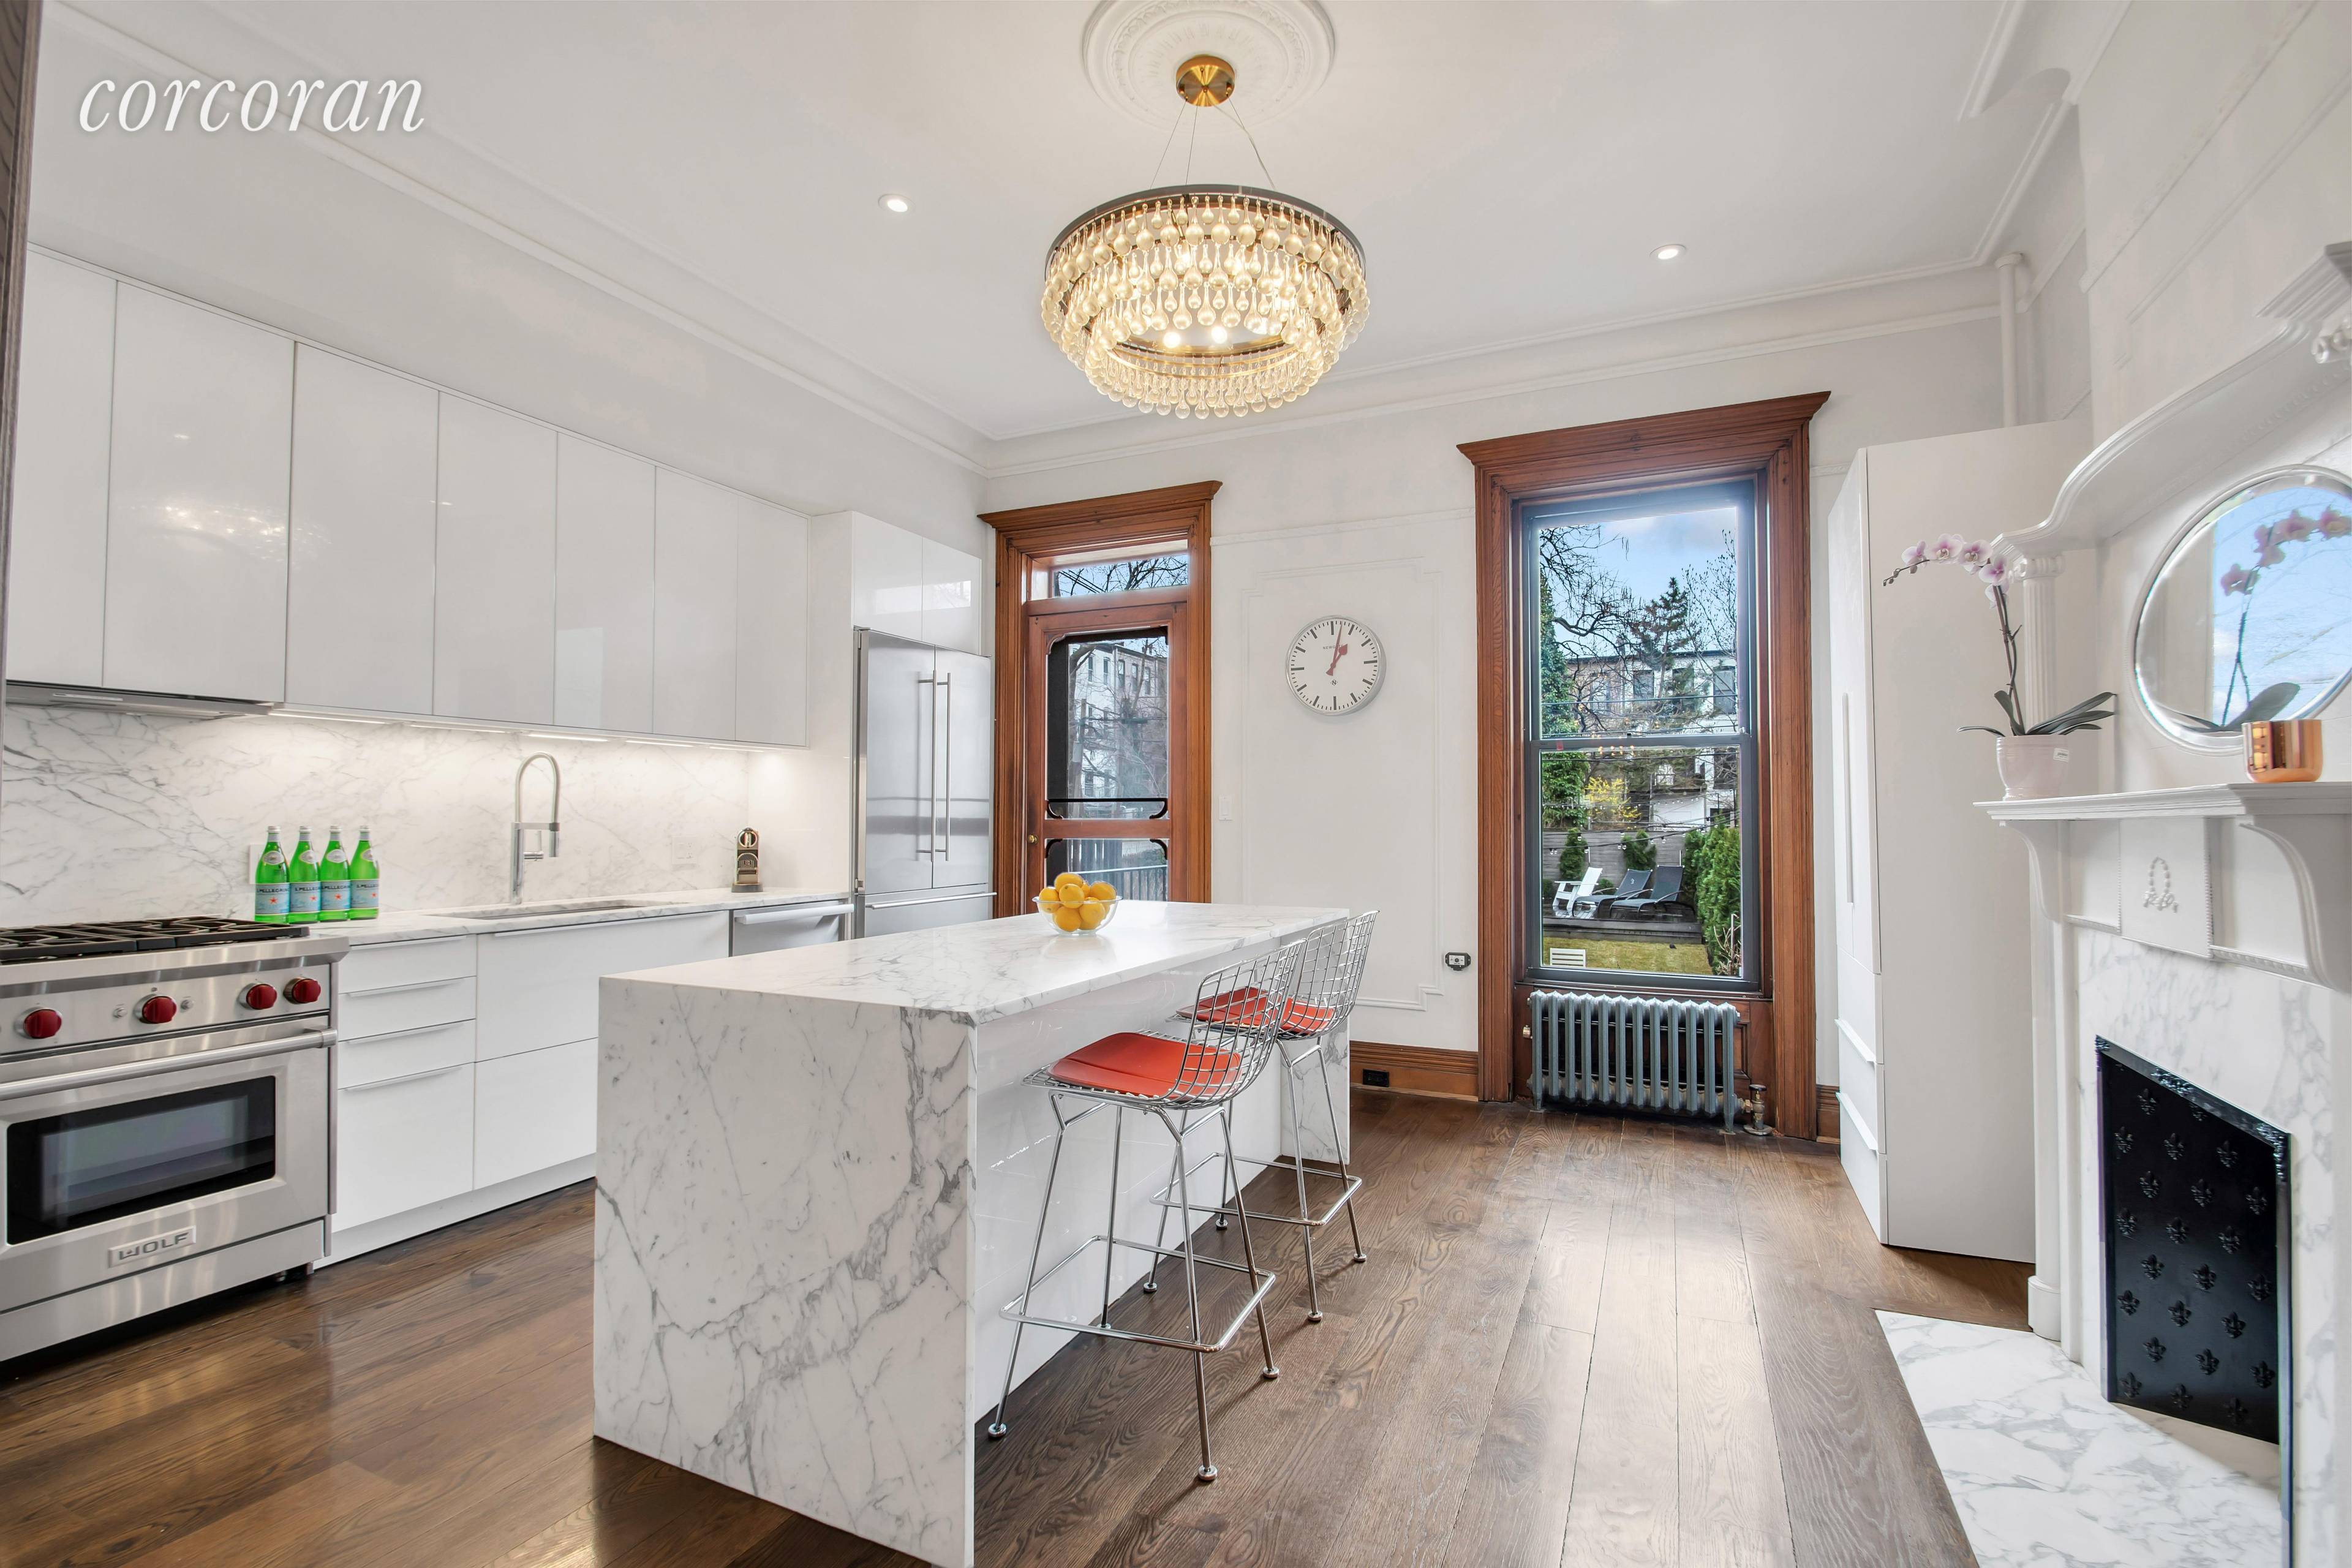 Designed by Brooklyn based architectural firm, Studio Modh, this quintessential Romanesque Revival Brownstone built in 1910 elegantly combines prewar charm with modern touches.